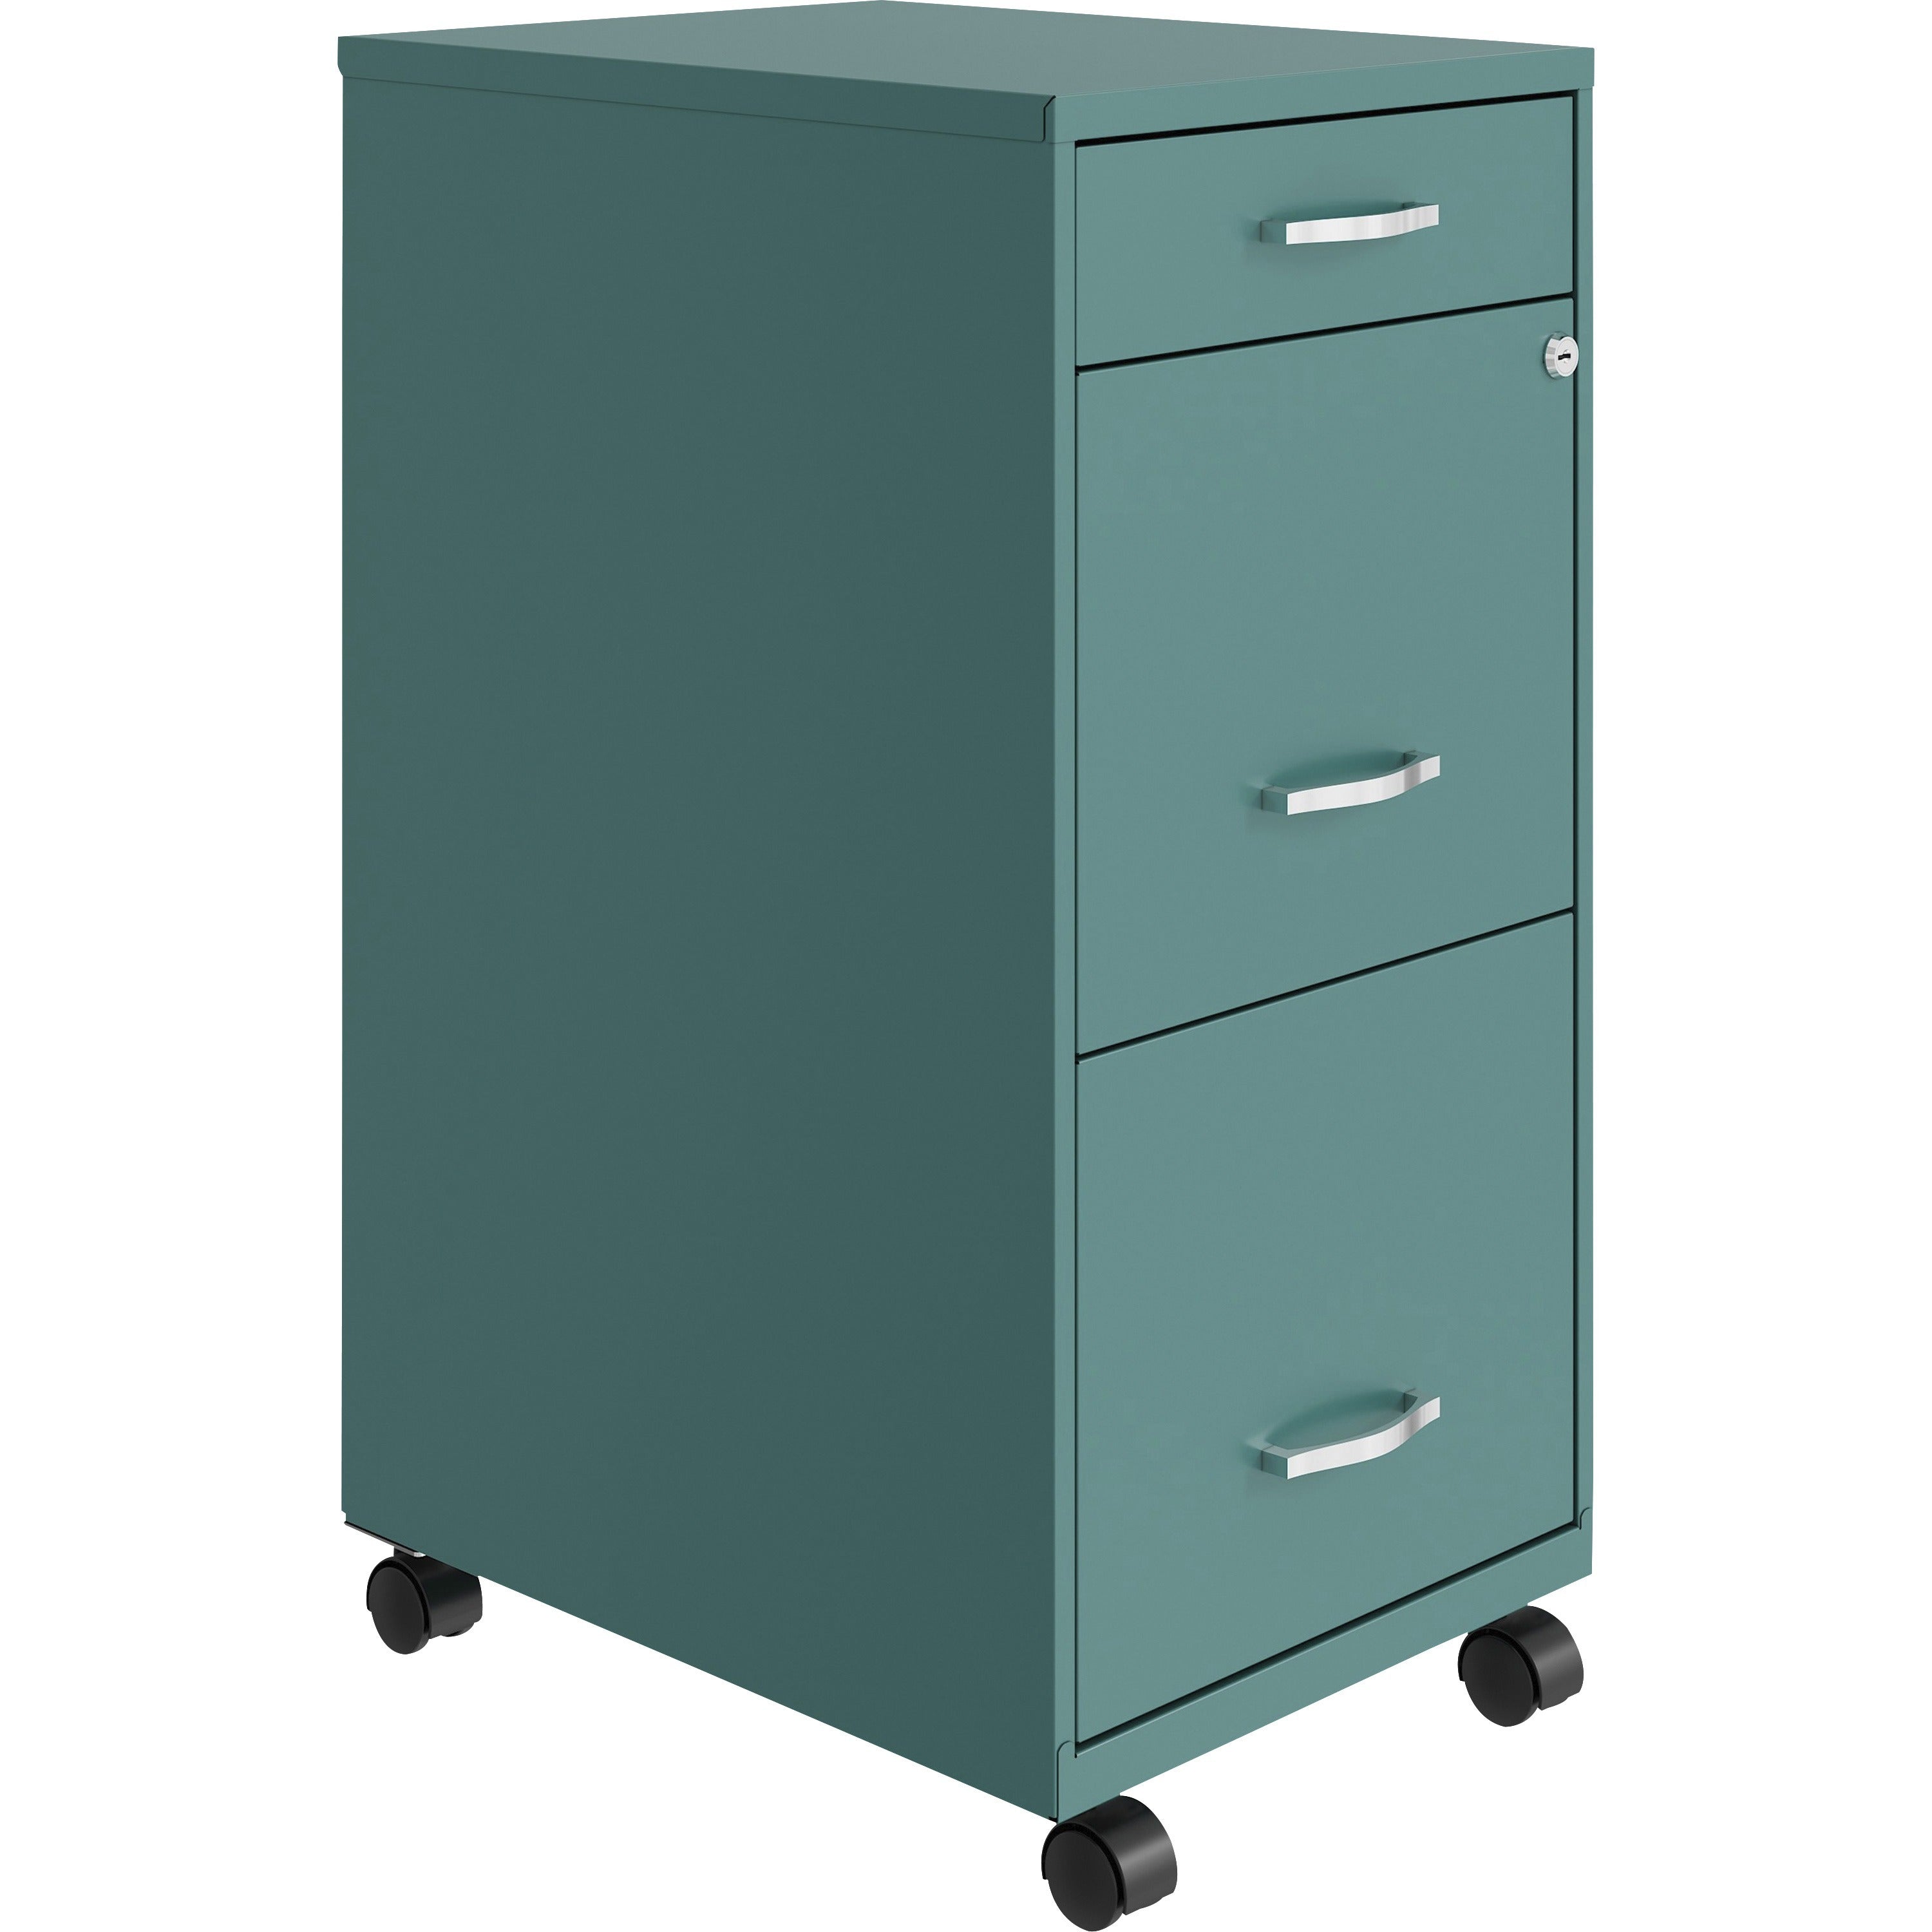 nusparc-mobile-file-cabinet-142-x-18-x-295-3-x-drawers-for-file-box-letter-mobility-locking-drawer-glide-suspension-3-4-drawer-extension-cam-lock-nonporous-surface-teal-painted-steel-recycled_nprvf318bmtl - 1